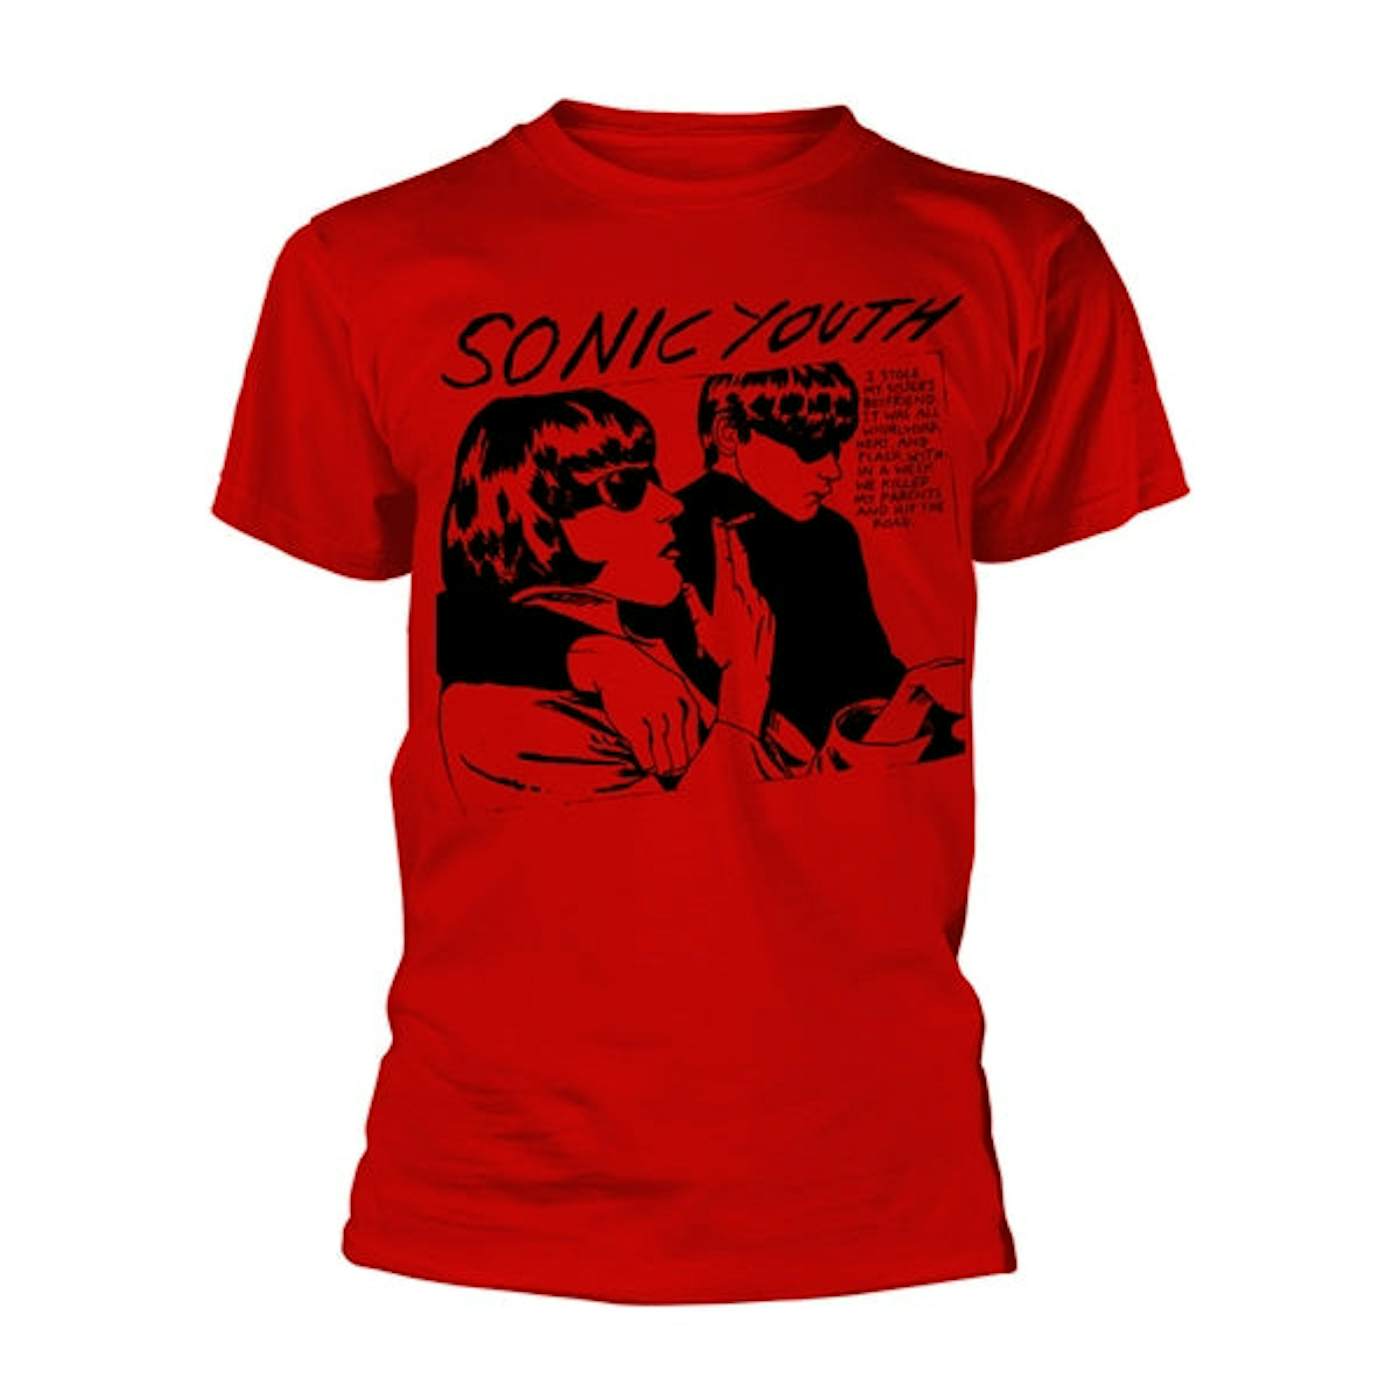 Sonic Youth T-Shirt - Goo Album Cover (Red)